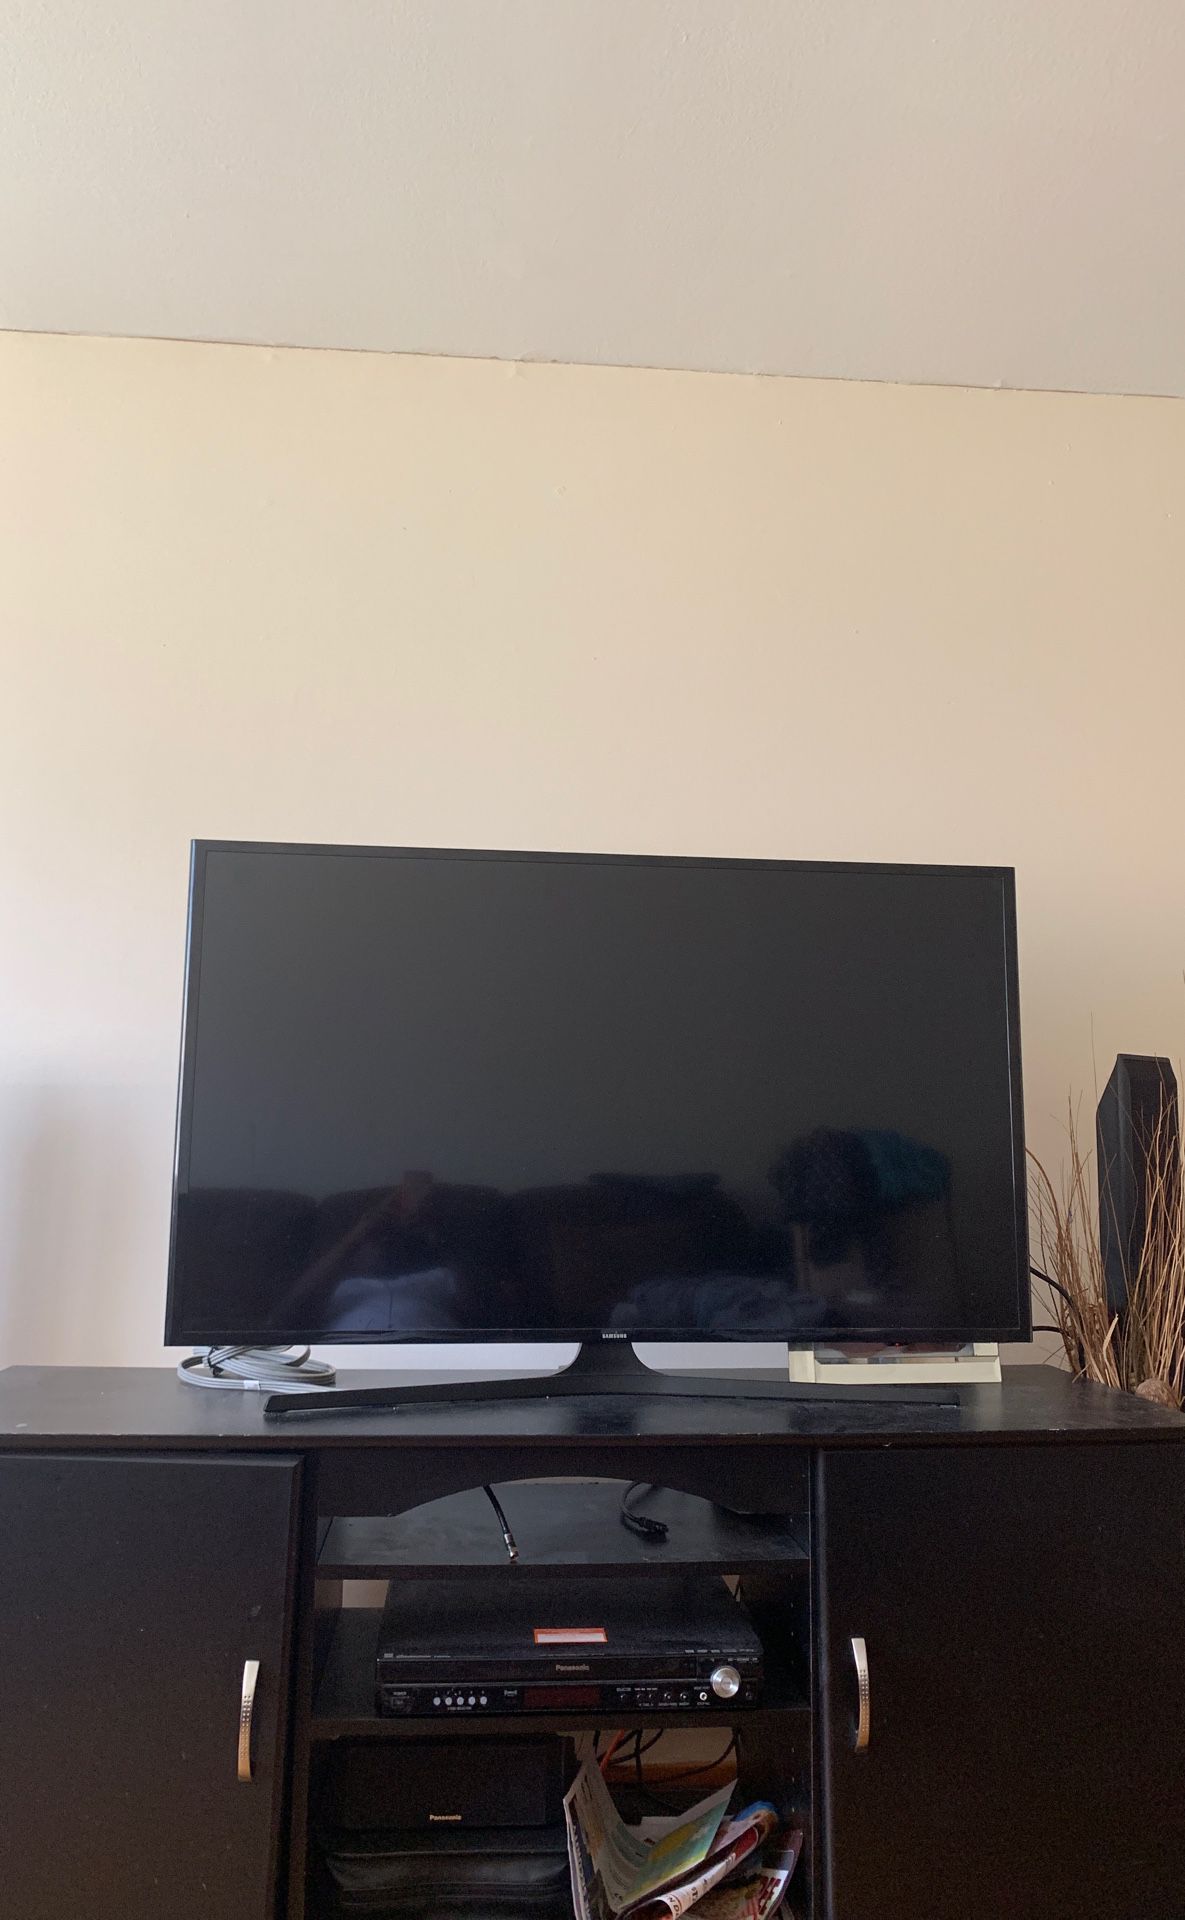 Samsung tv led 48 inches